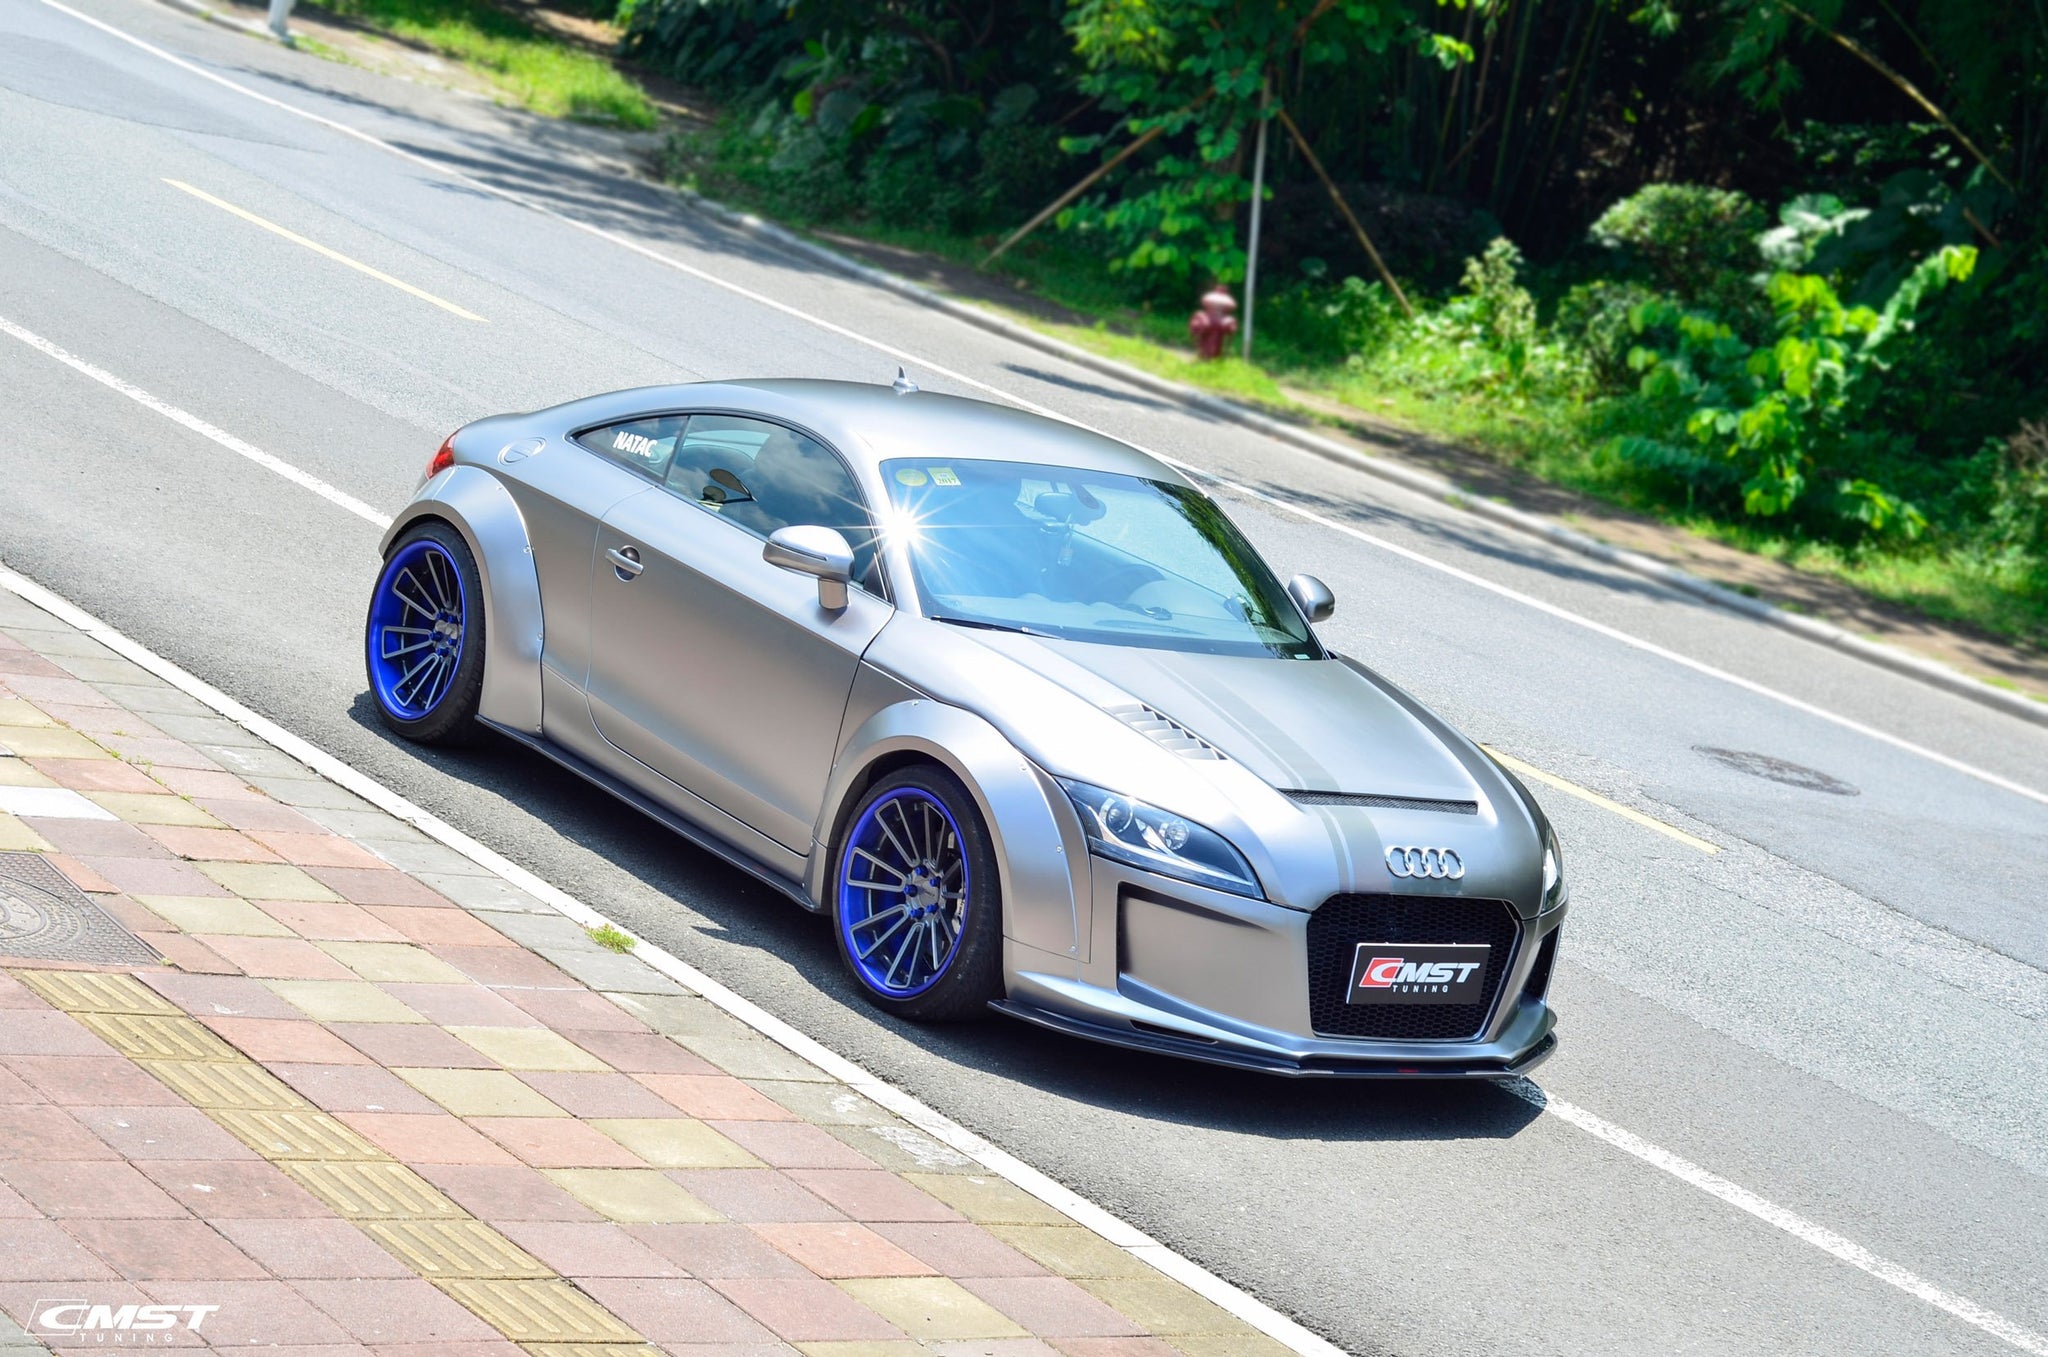 Check our price and buy CMST Carbon Fiber WideBody Kit set for Audi TT / TTS!